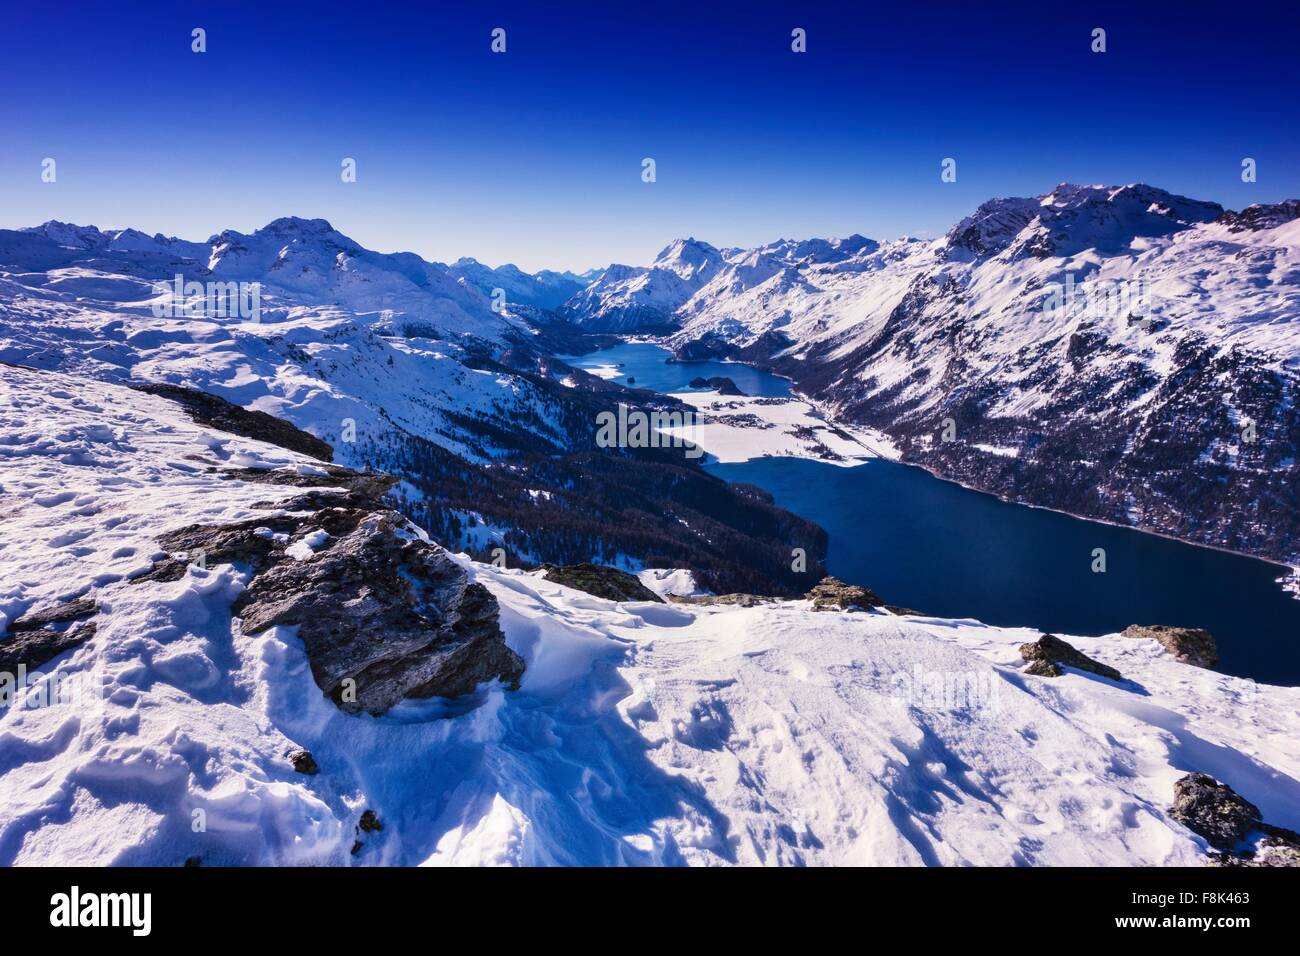 View of snow covered mountains, Engadin, Switzerland Stock Photo